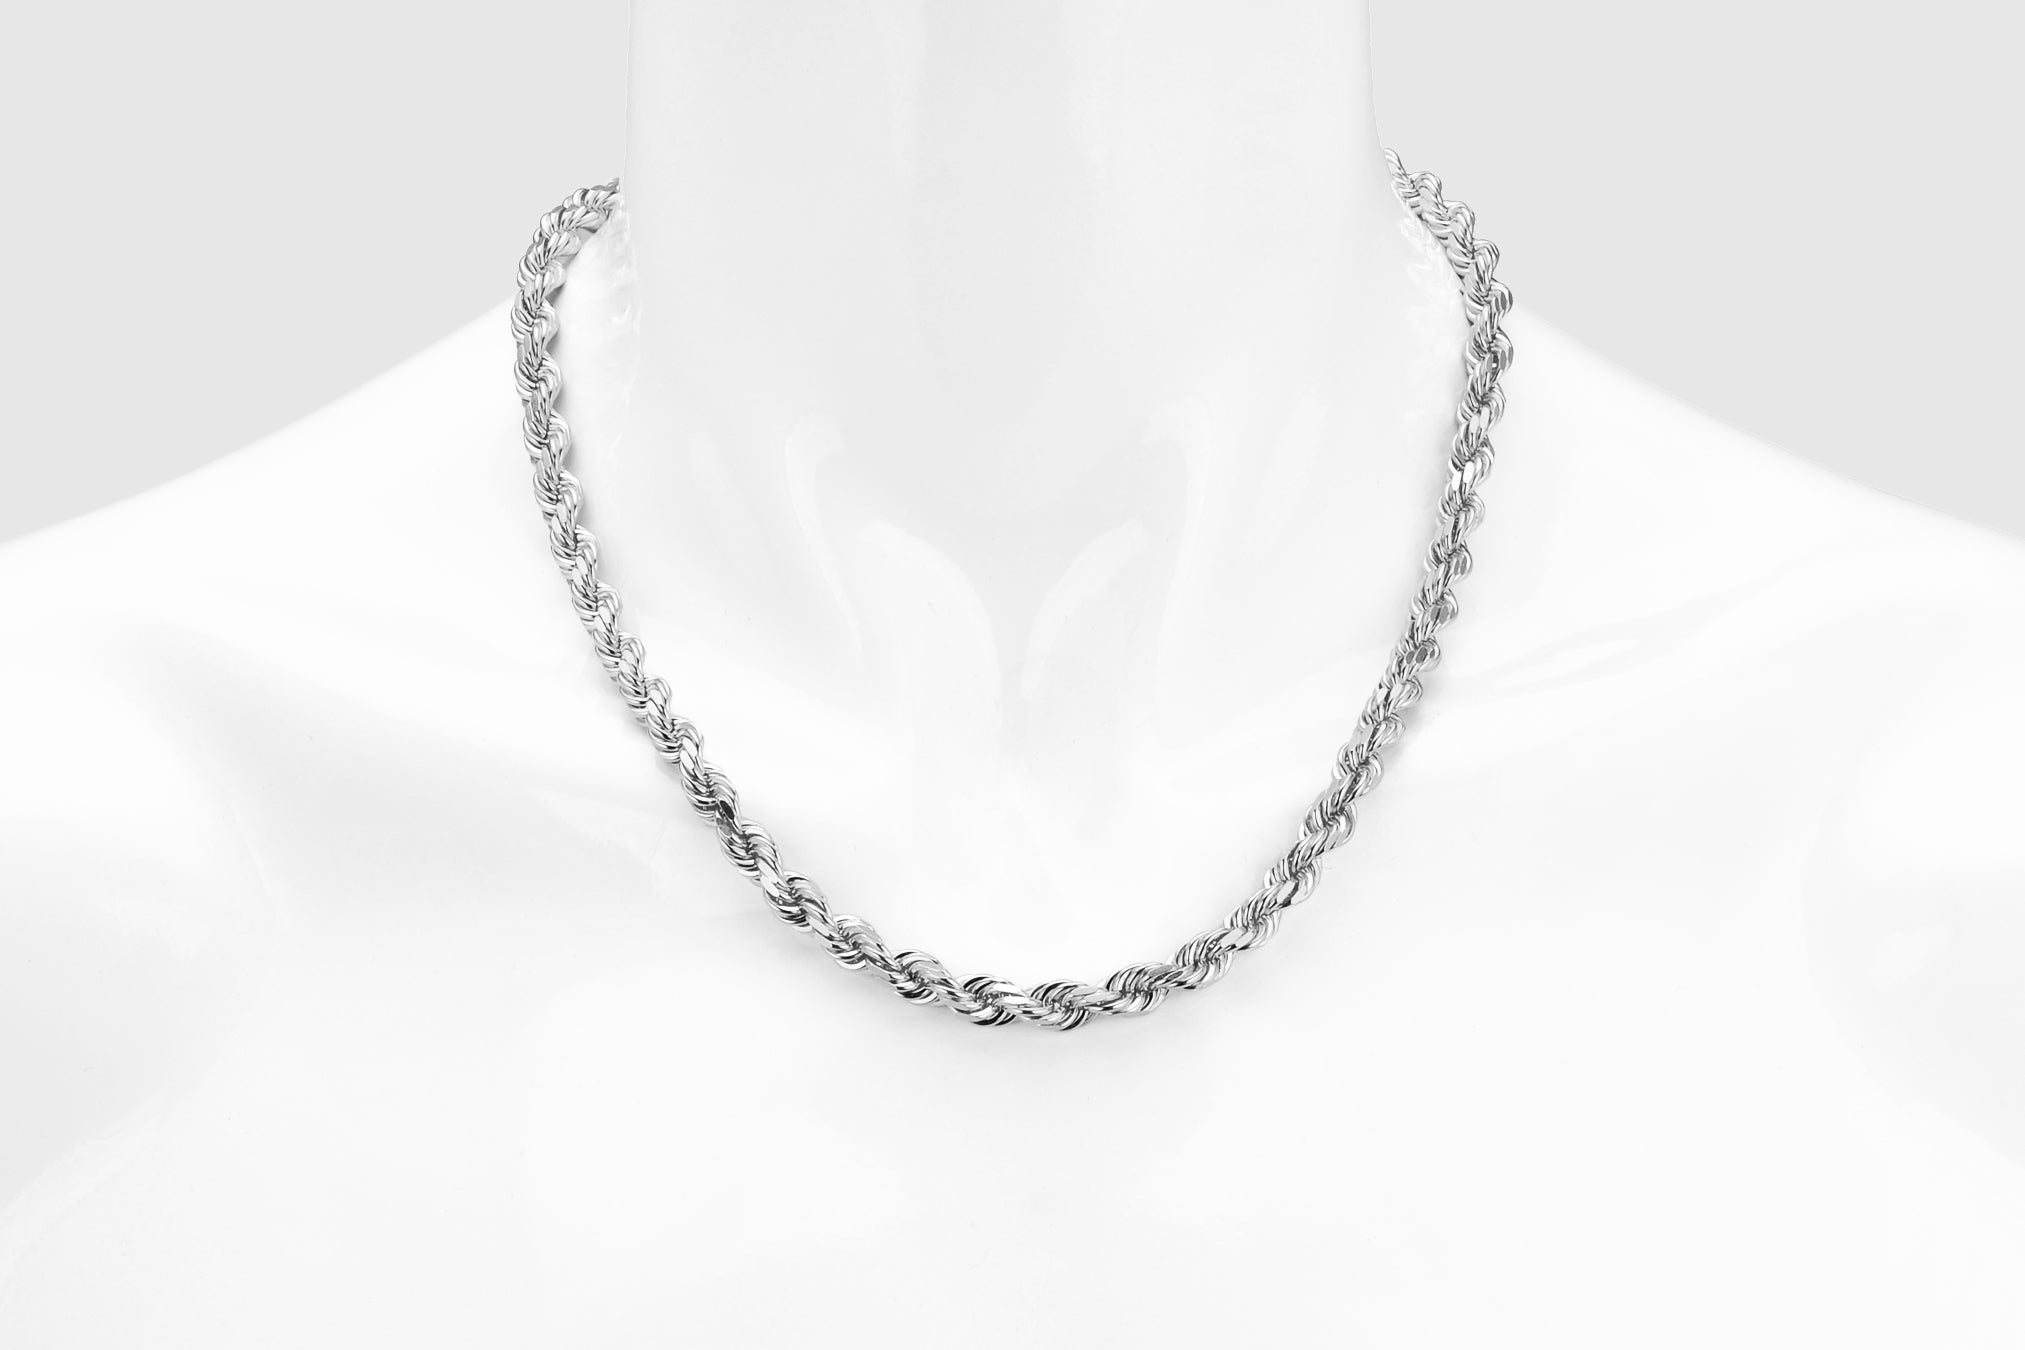 Beaded chain in 18k white gold, 16